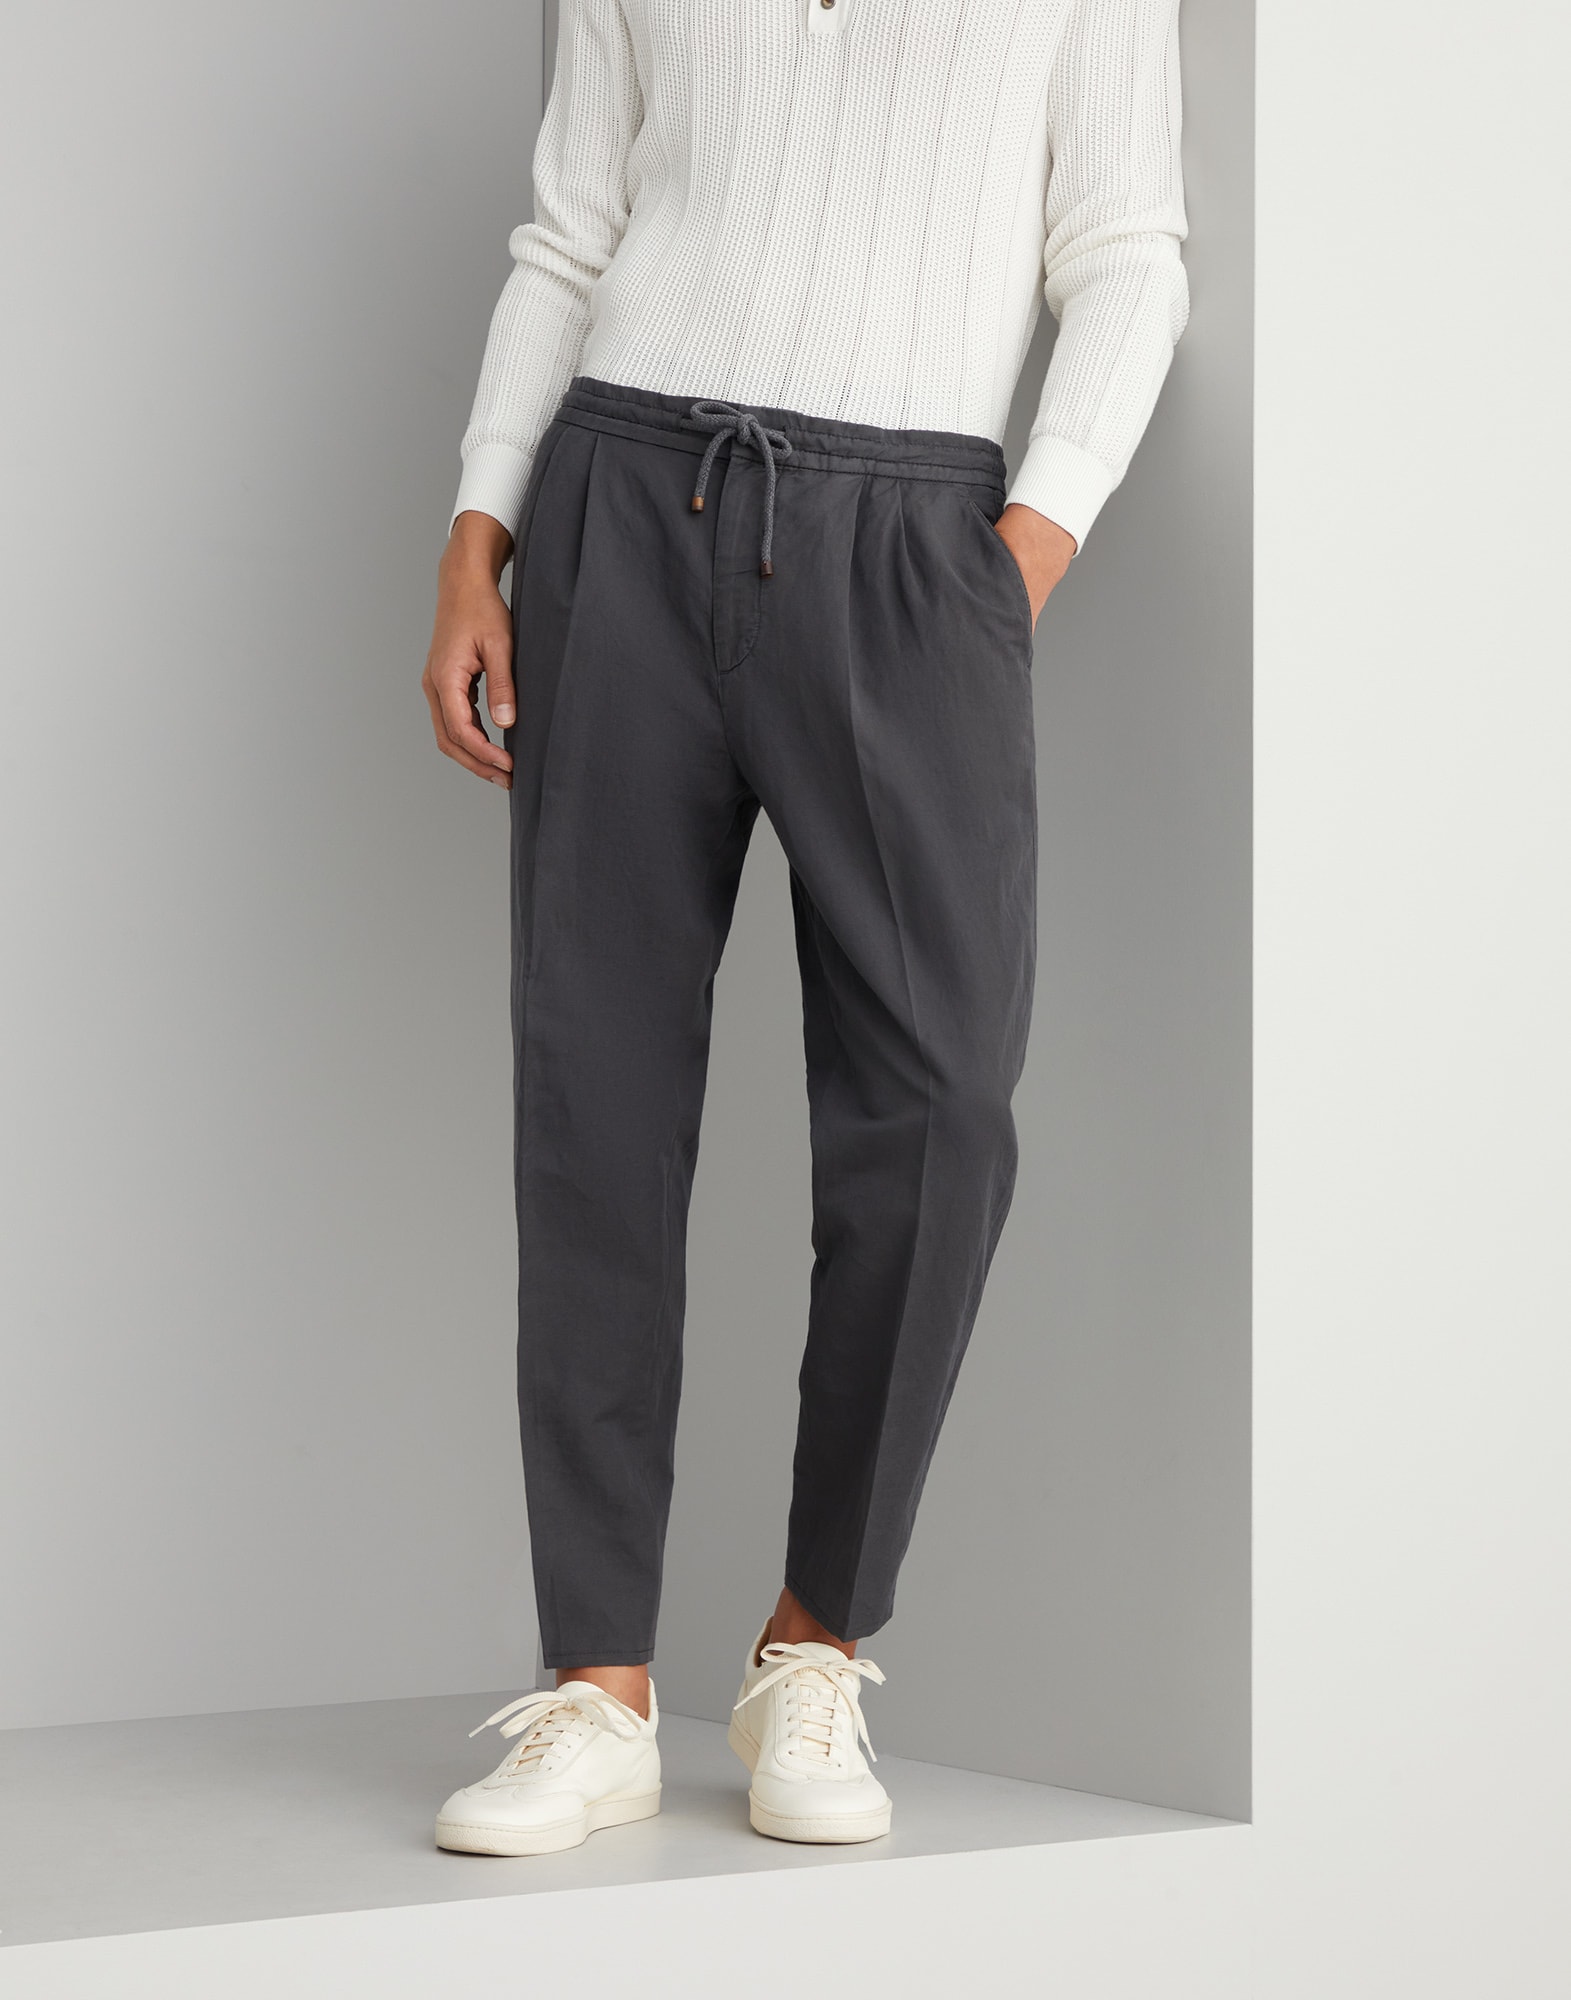 Leisure fit trousers with drawstring